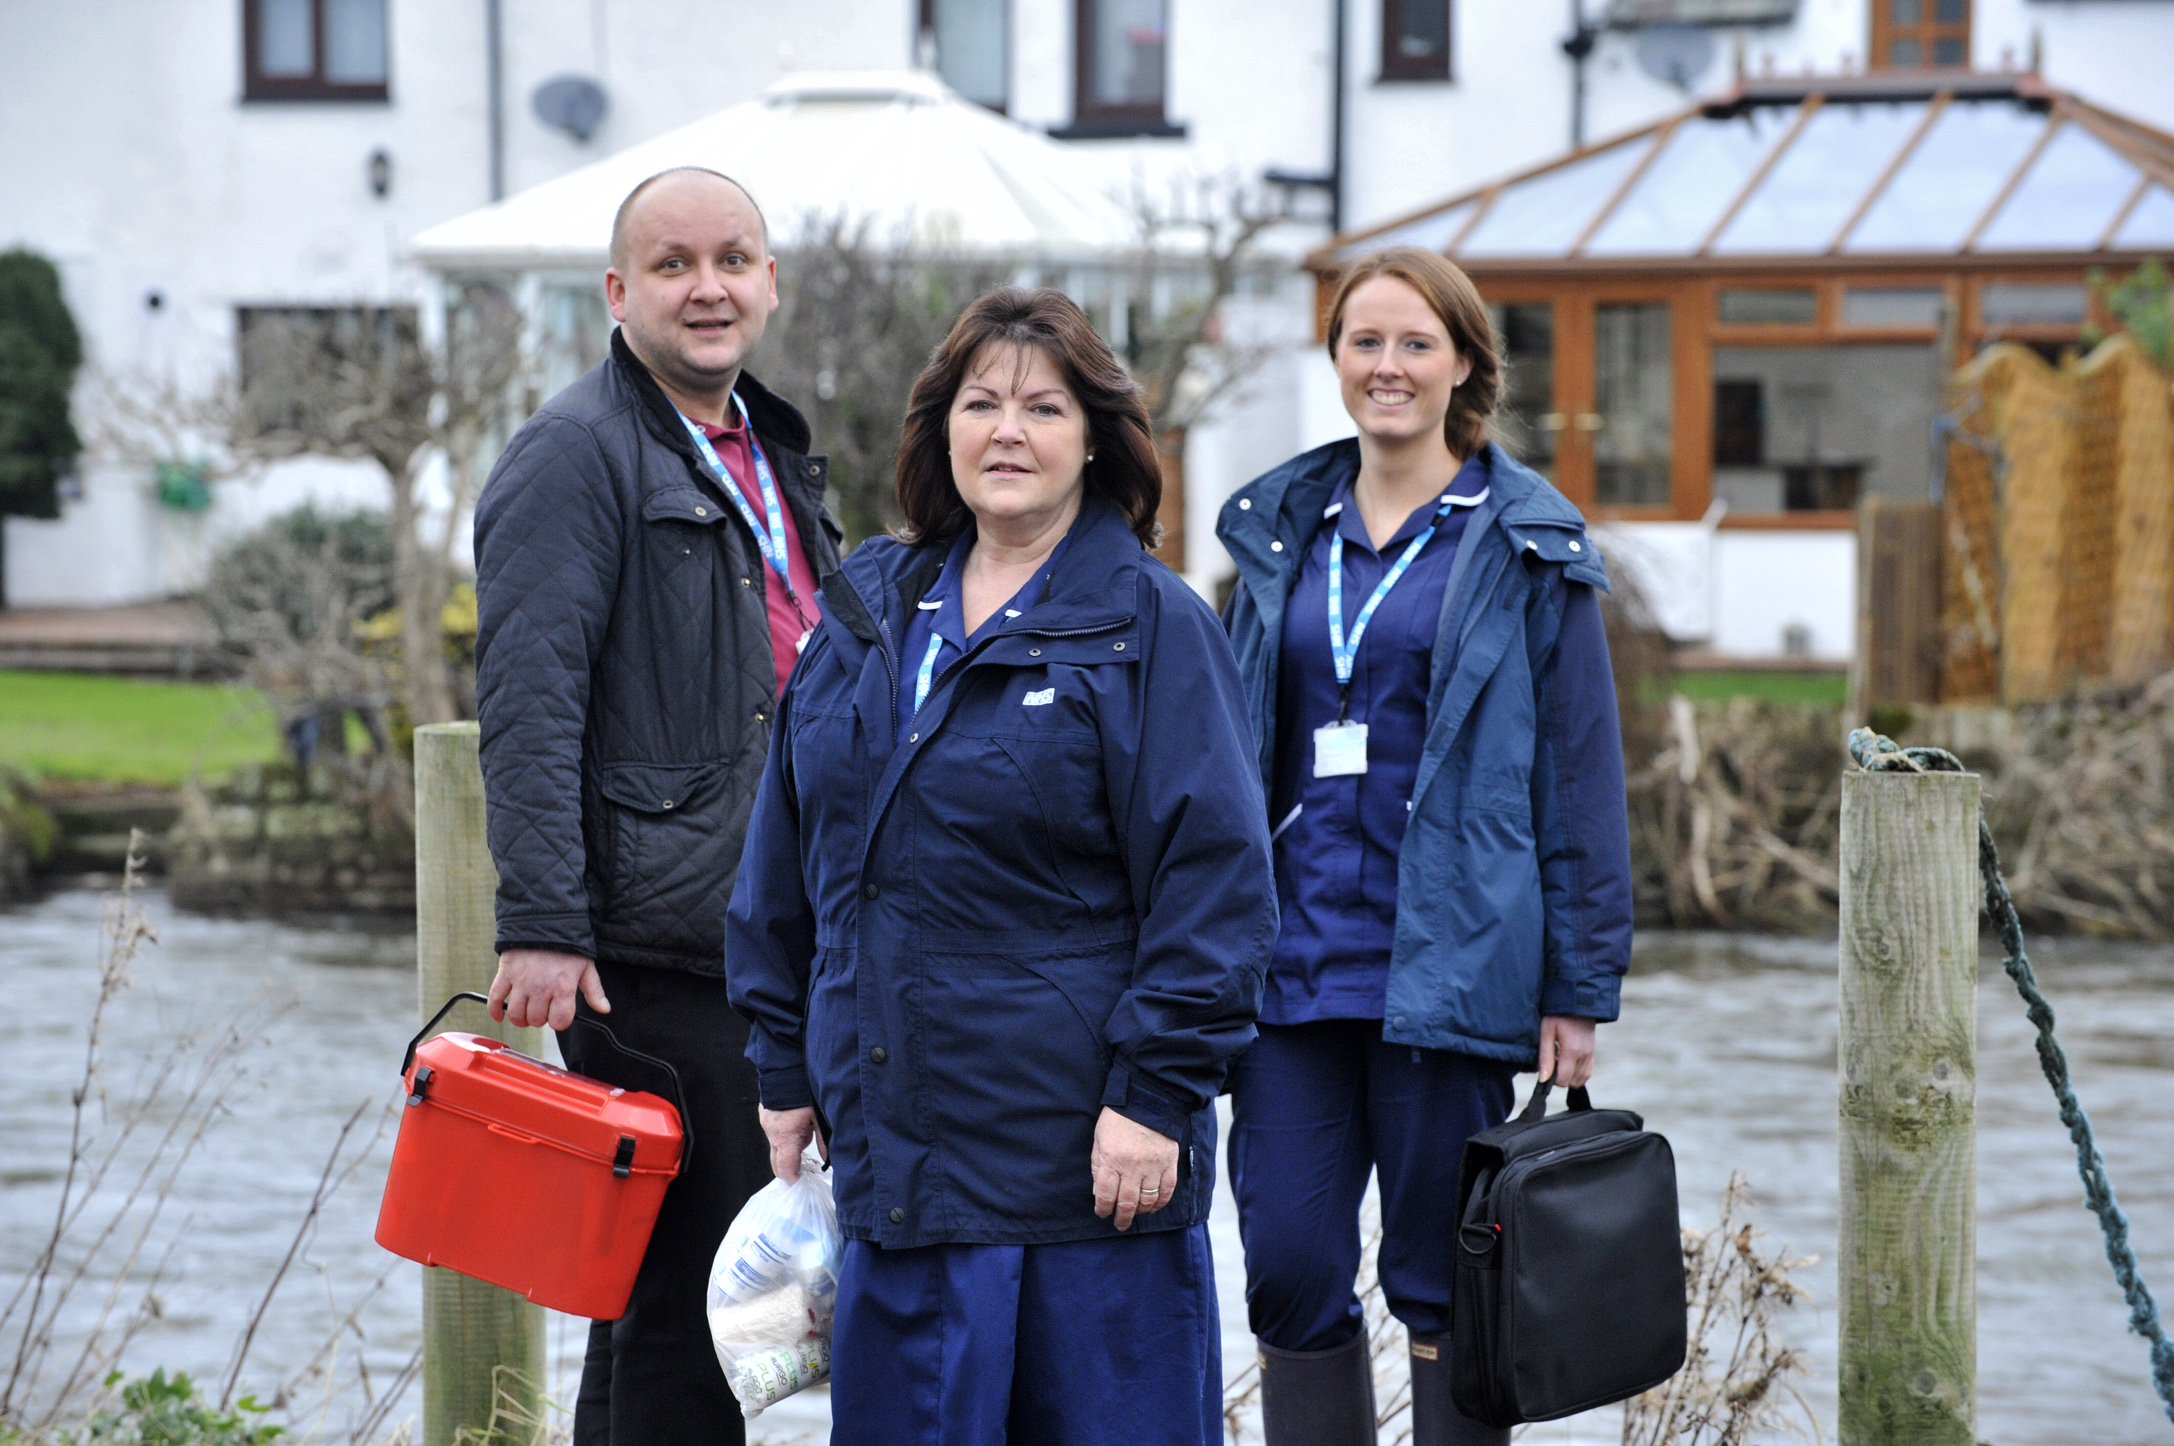 Cumbria NHS Trusts provide excellent community work to the thousands of people affected by Storm De featured image